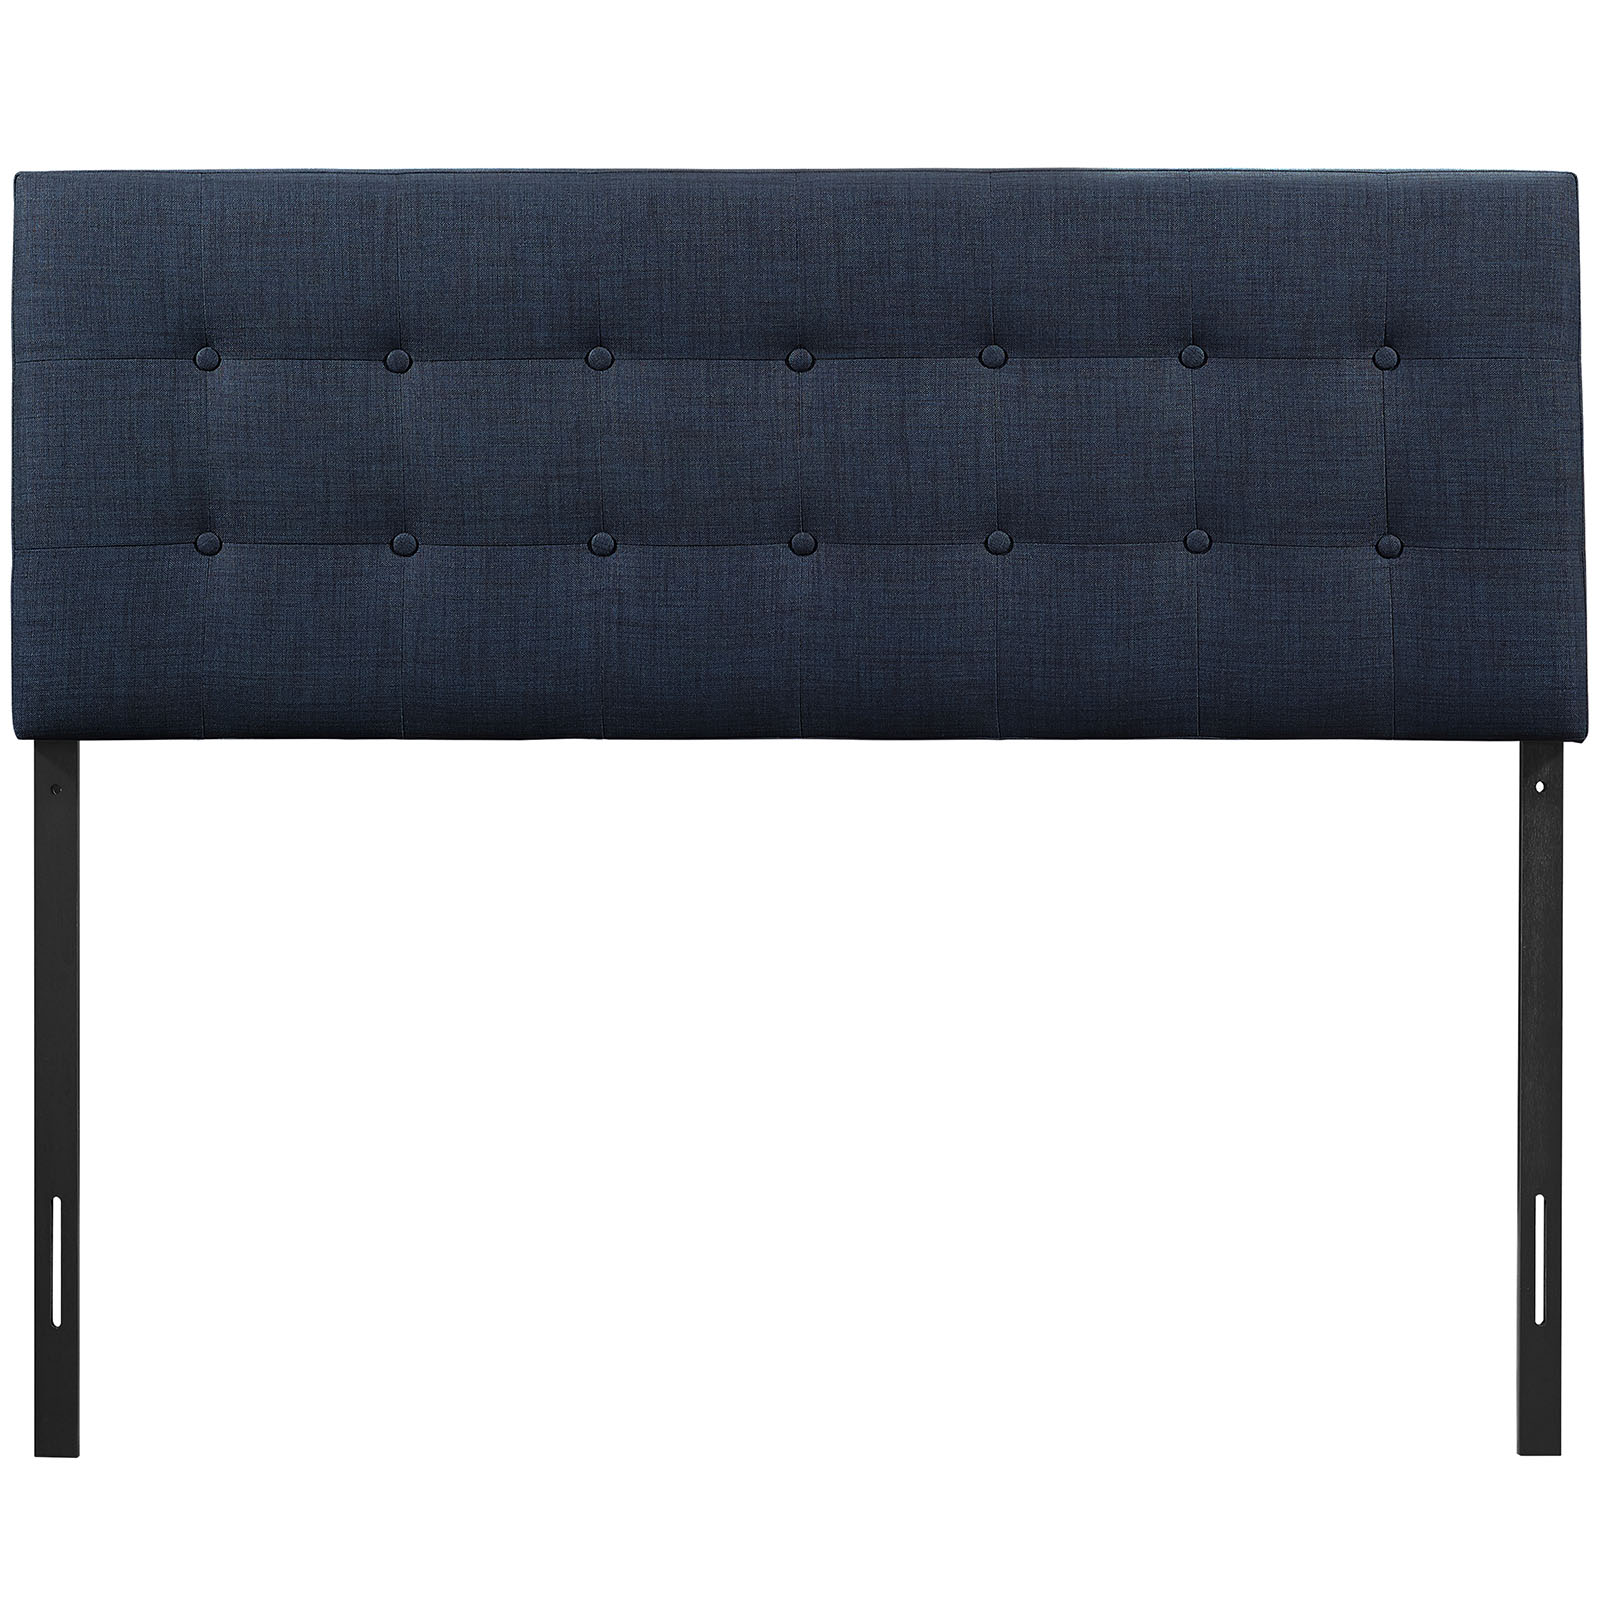 LexMod Emily Queen Upholstered Fabric Headboard in Navy